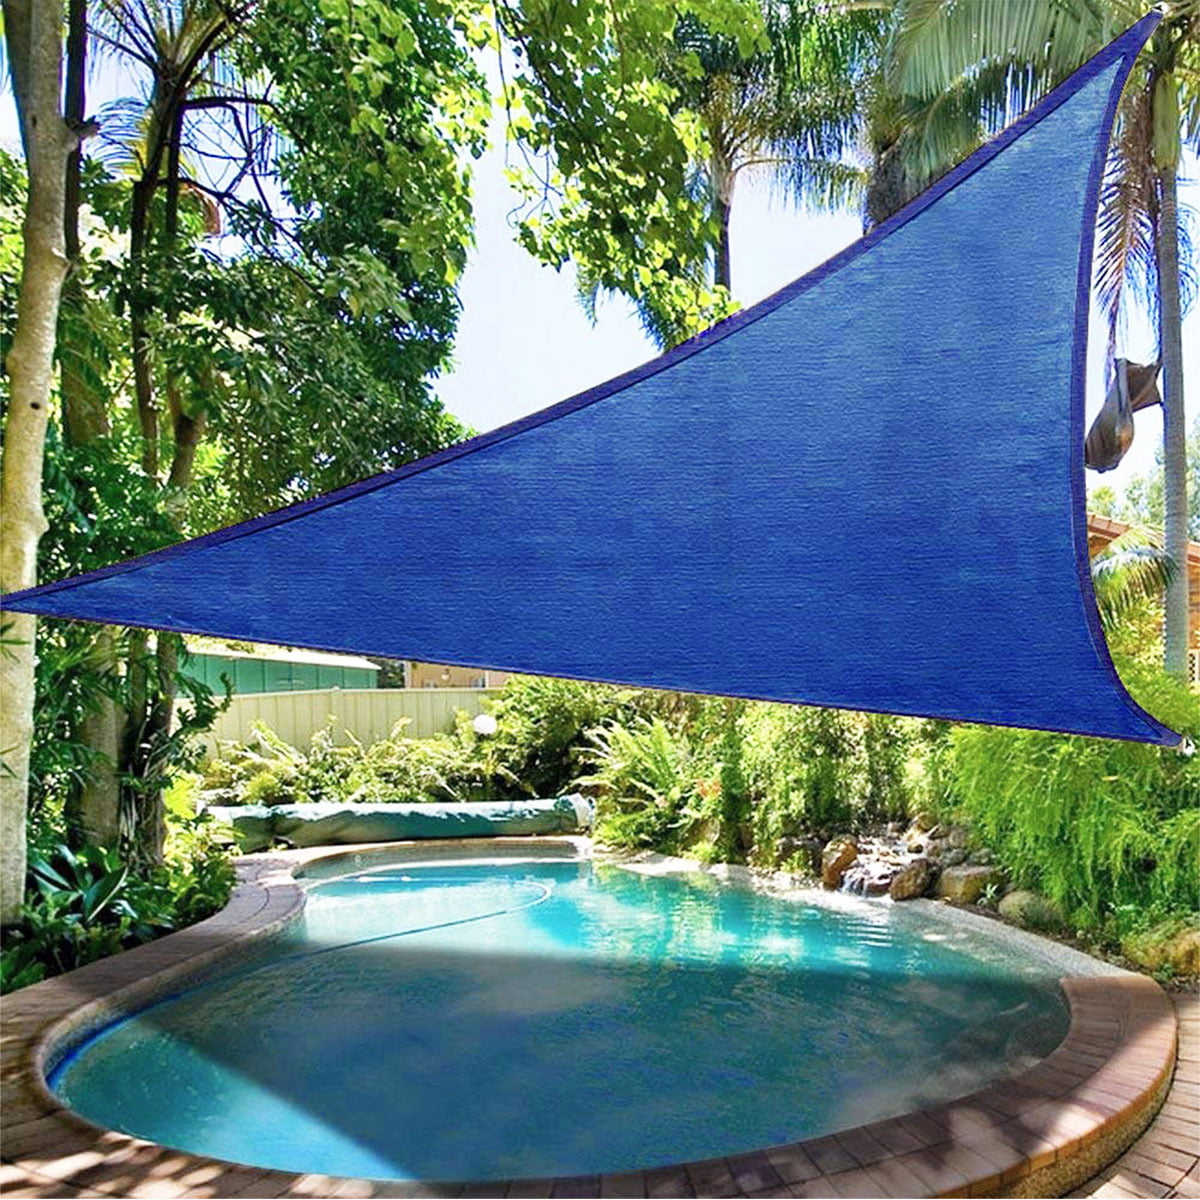 6.5 8 10 11.5" Sun Shade Sail UV Block Canopy Patio Pool Awning Cover Outdoor 